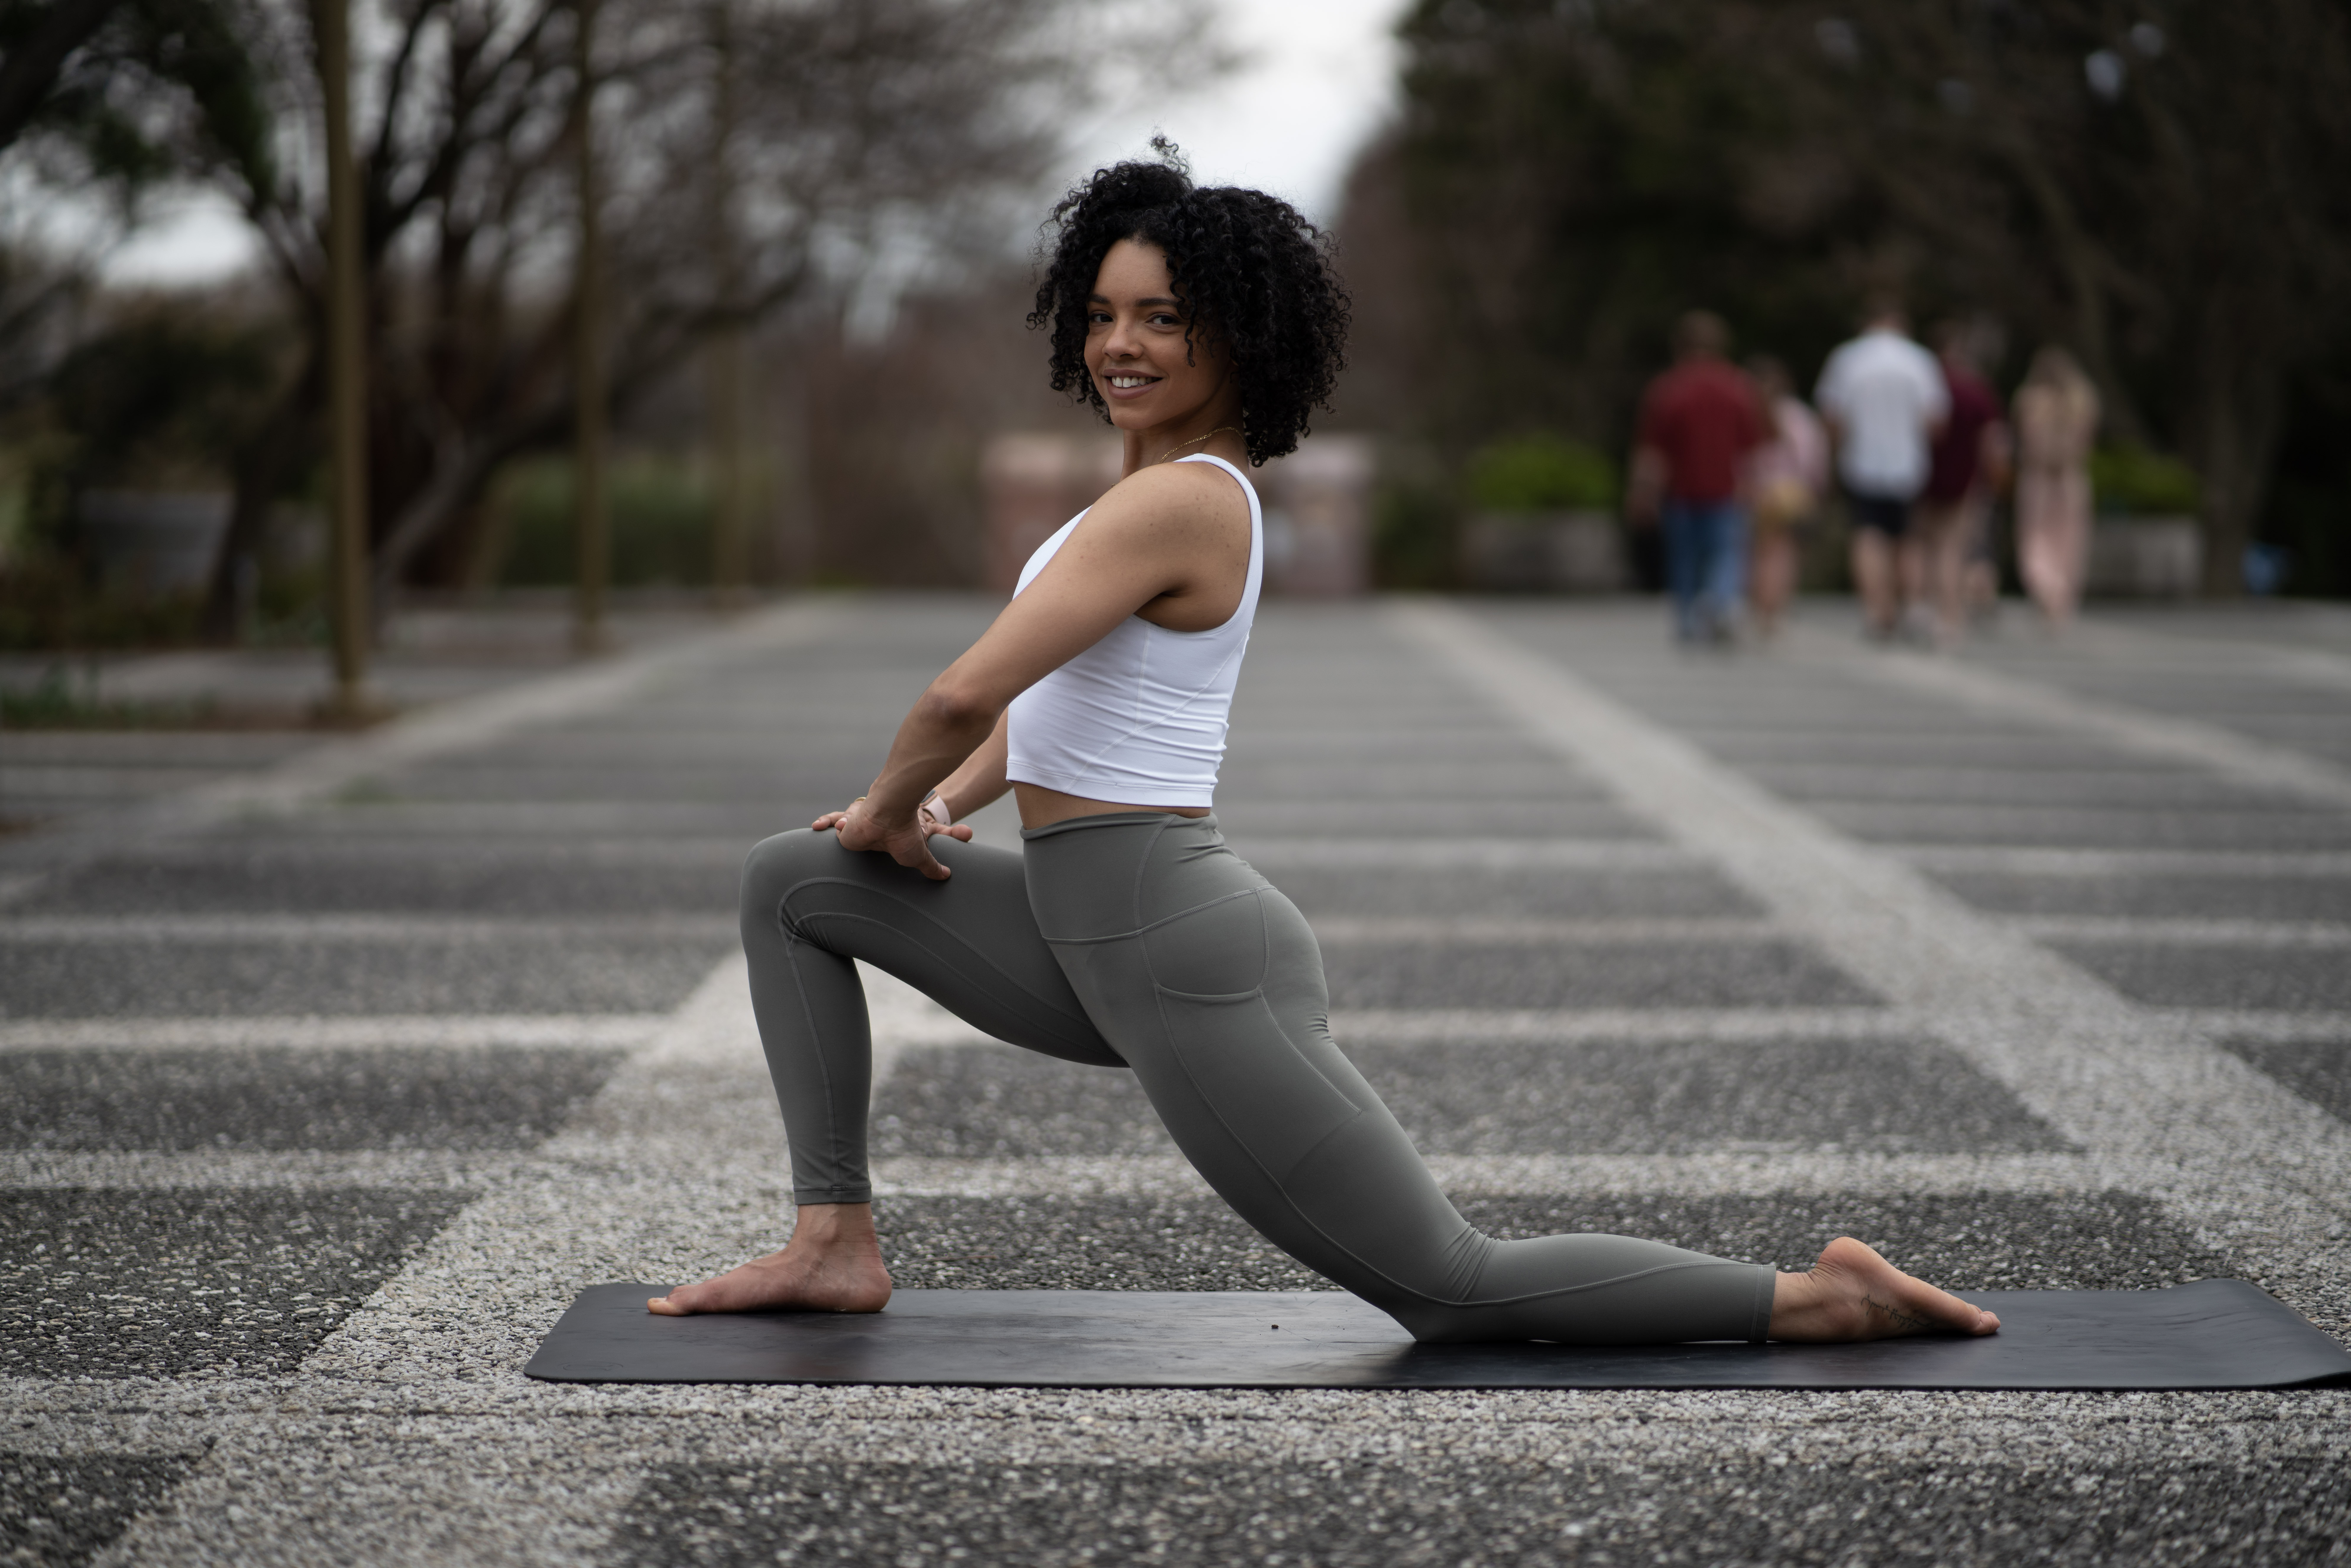 Yoga 101: A Beginner's Guide to Flexibility, Flow + Poses